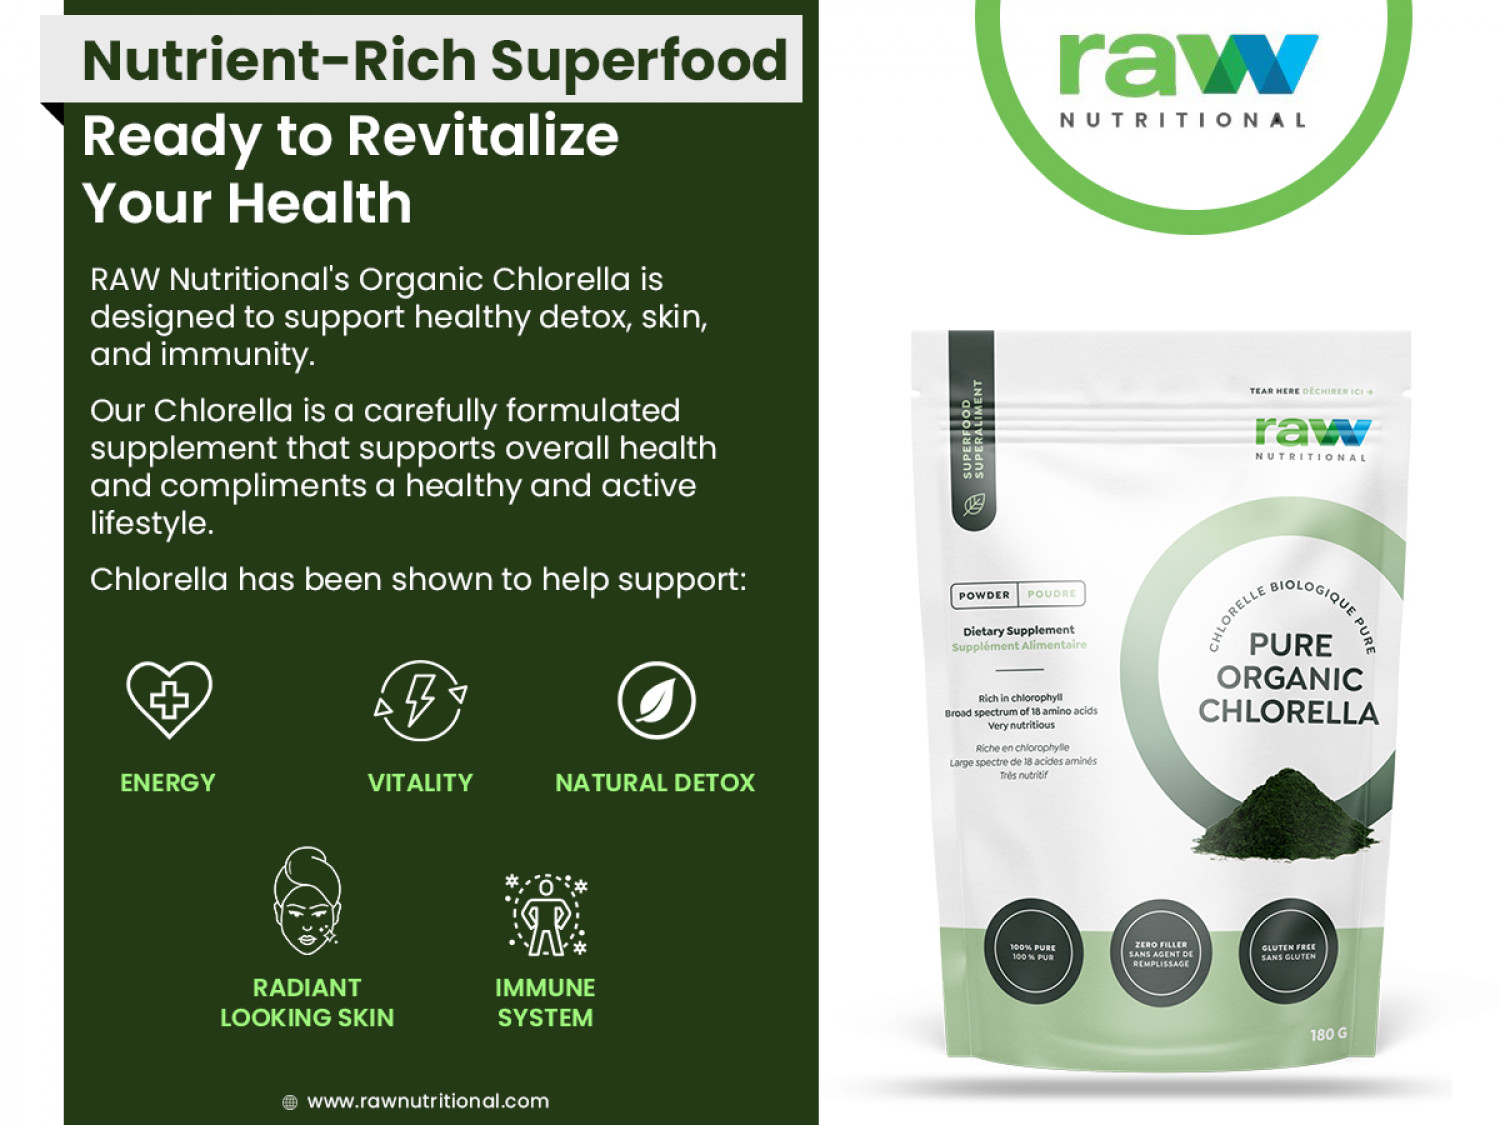 Nutrient-Rich #Superfood Ready to Revitalize Your #Health   Infographic